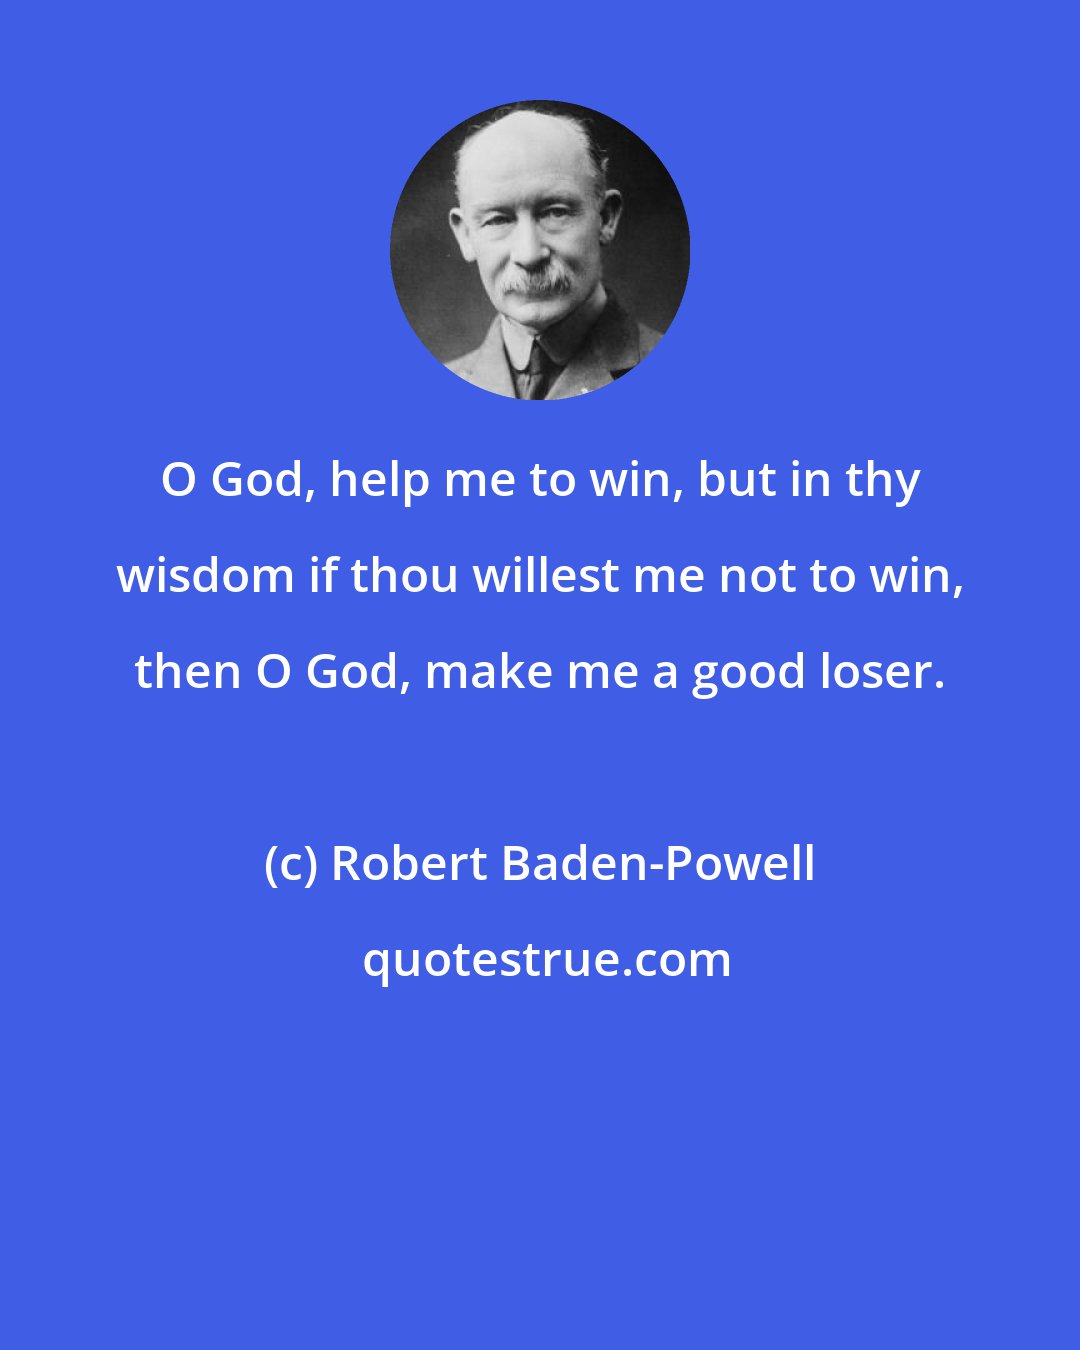 Robert Baden-Powell: O God, help me to win, but in thy wisdom if thou willest me not to win, then O God, make me a good loser.